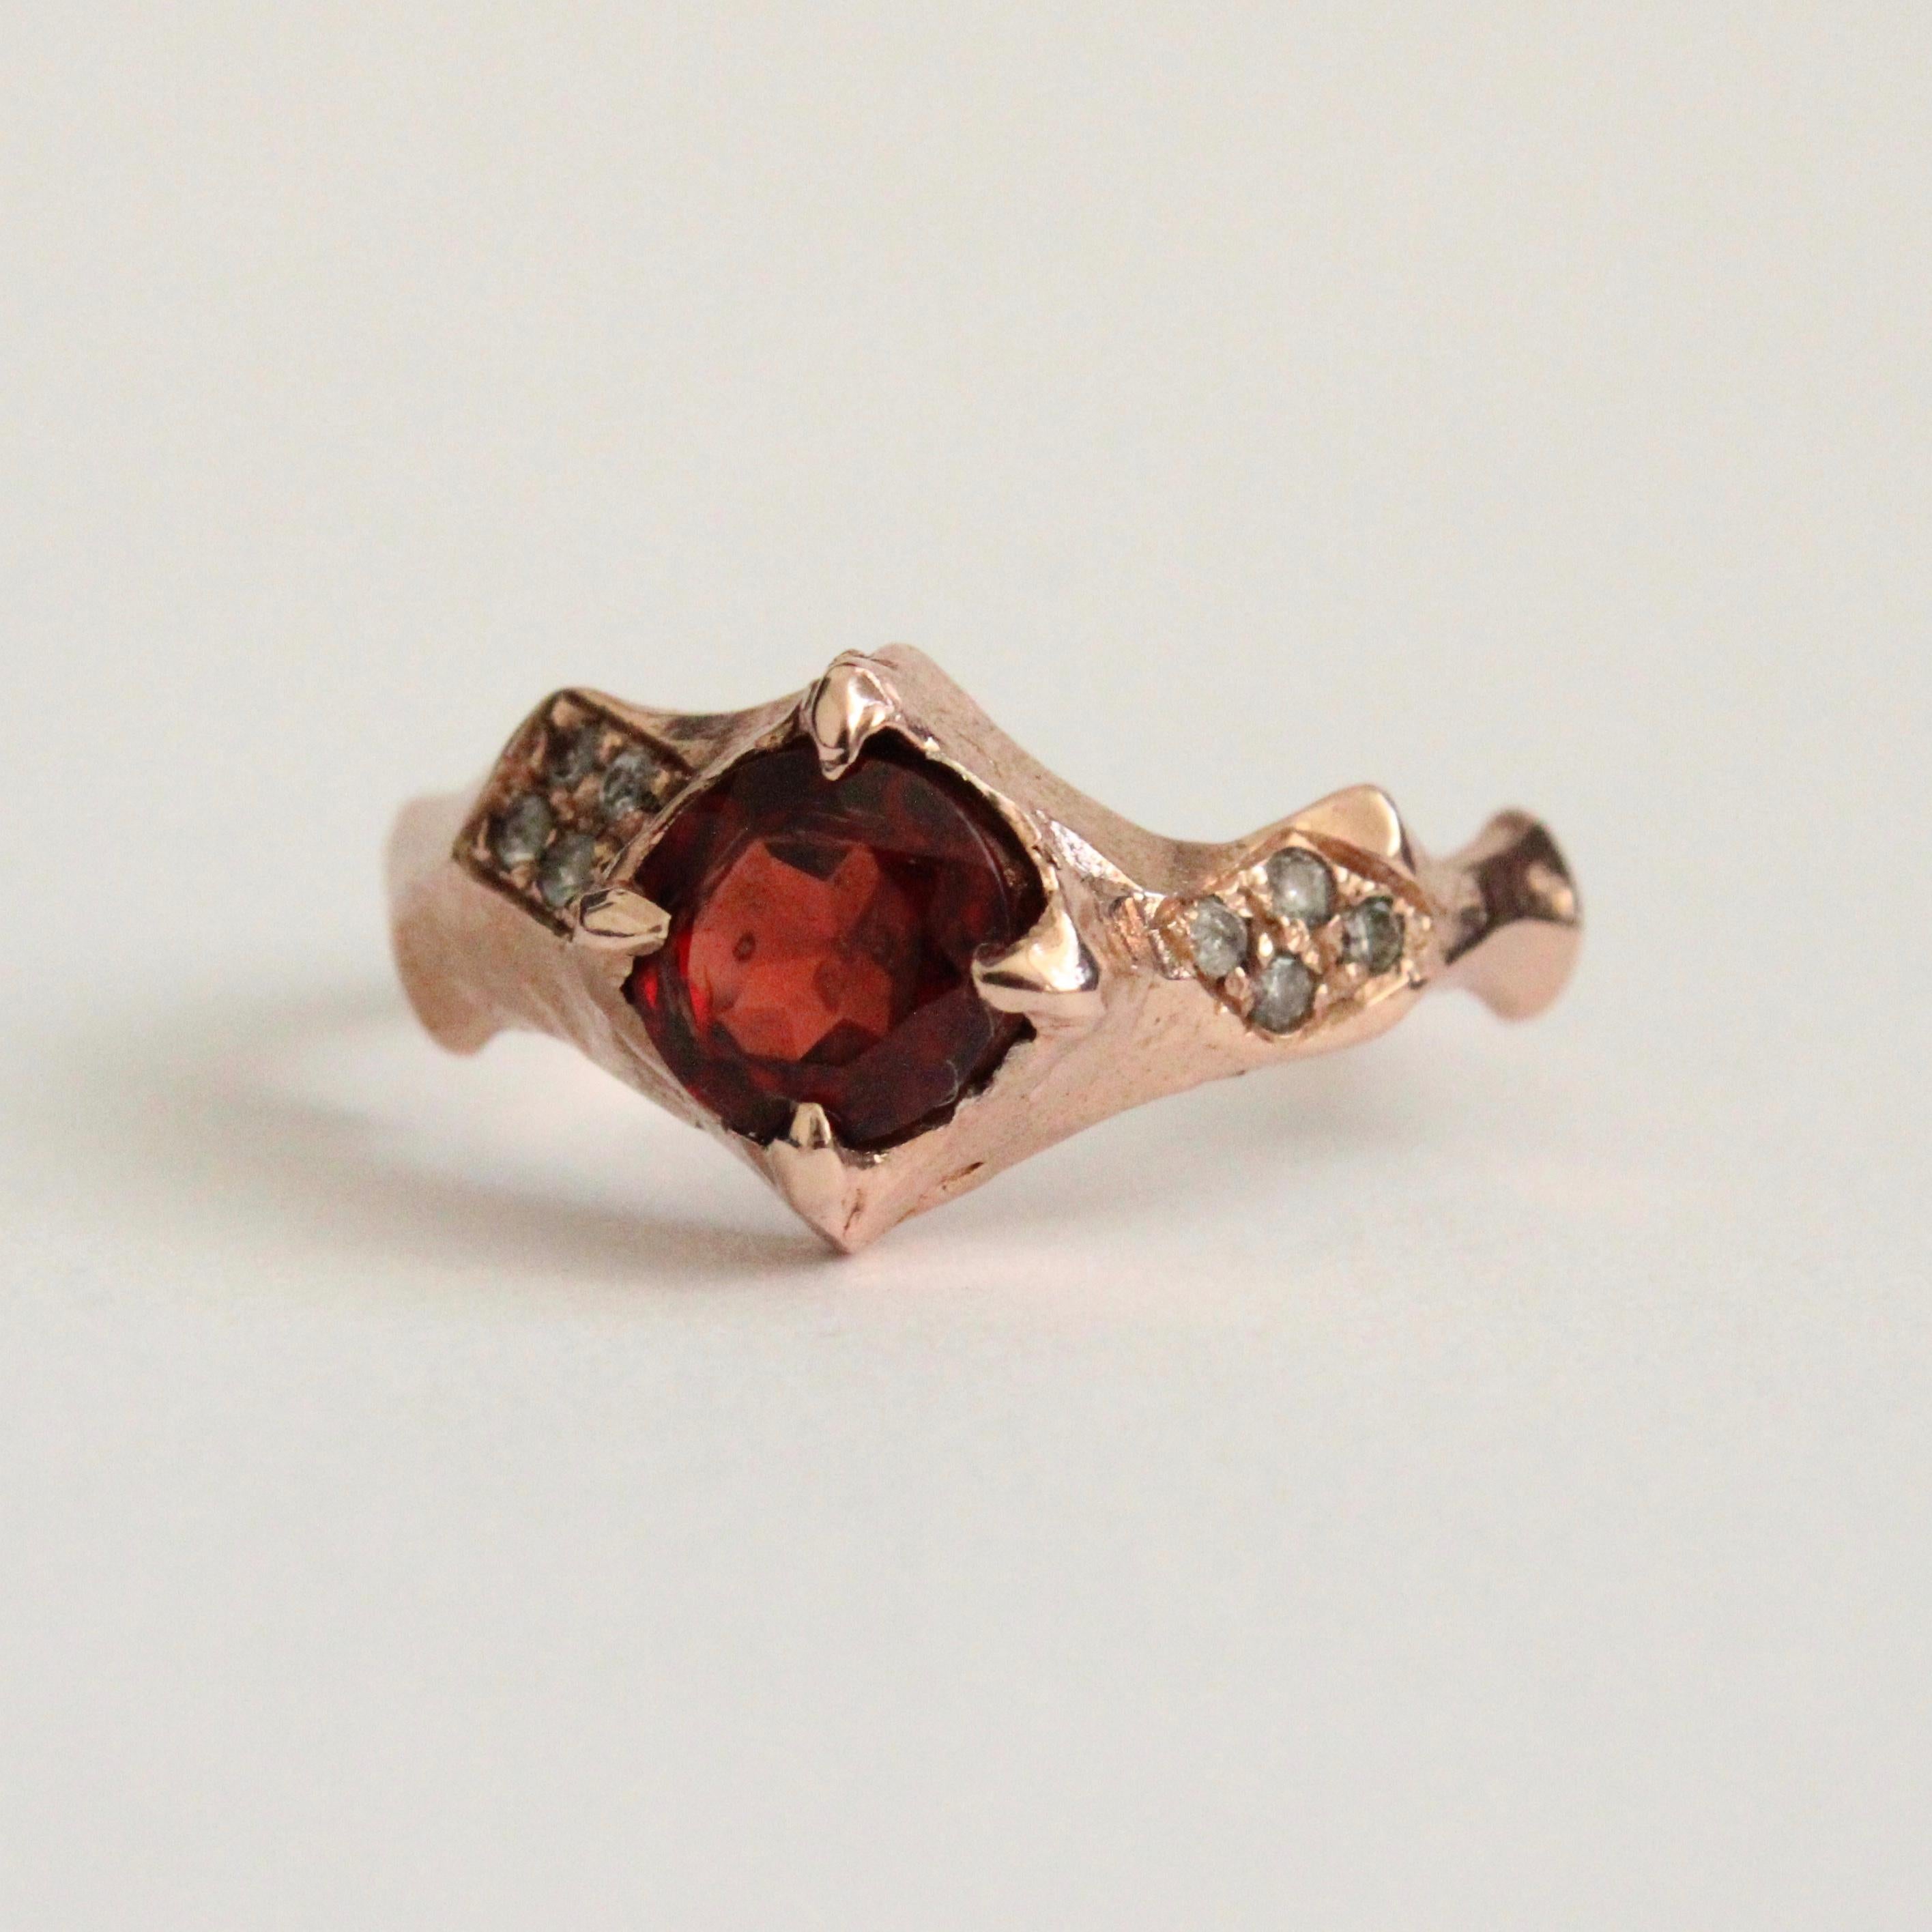 This handmade rose gold ring is hand carved and set with 1.3mm pave diamonds and a center 6mm deep red garnet . One of a kind Size 6.5